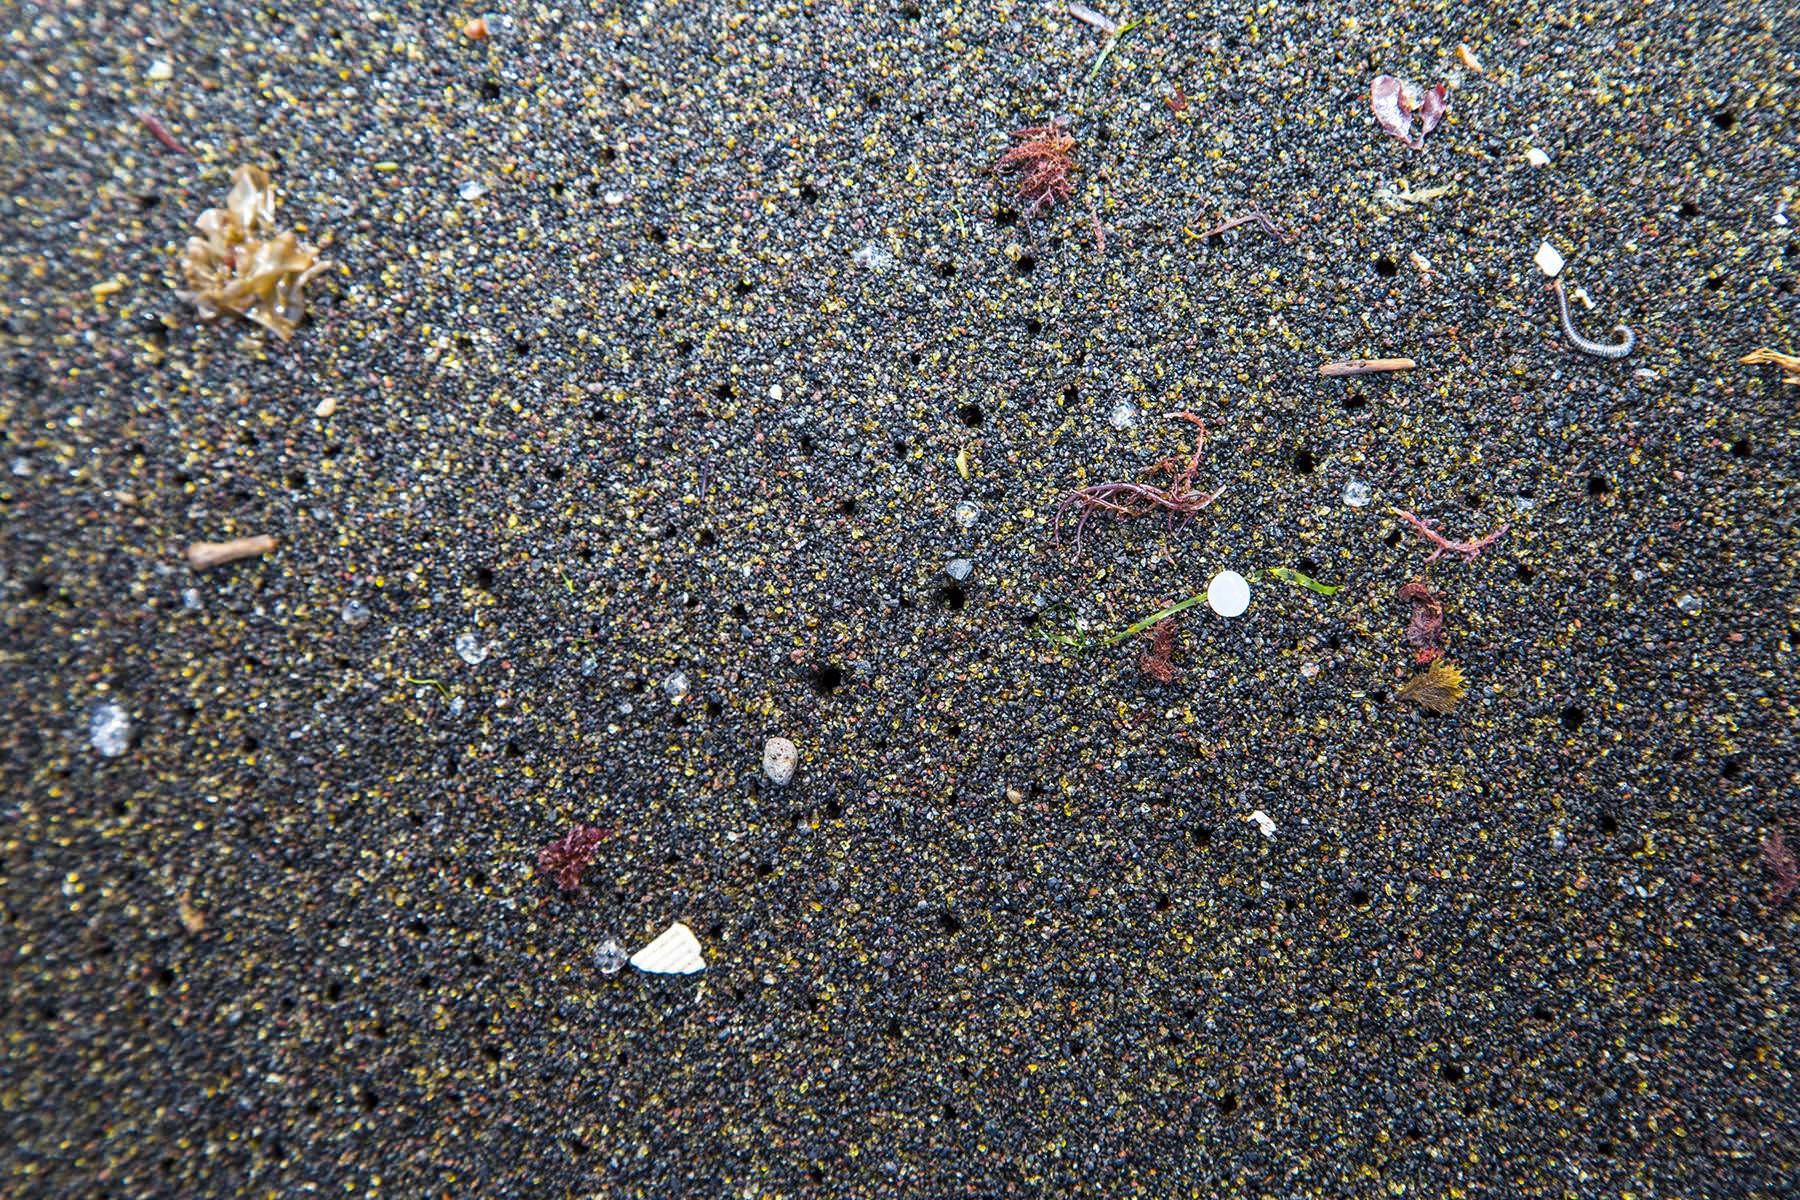 Wastewater treatment plants are key route into UK rivers for microplastics